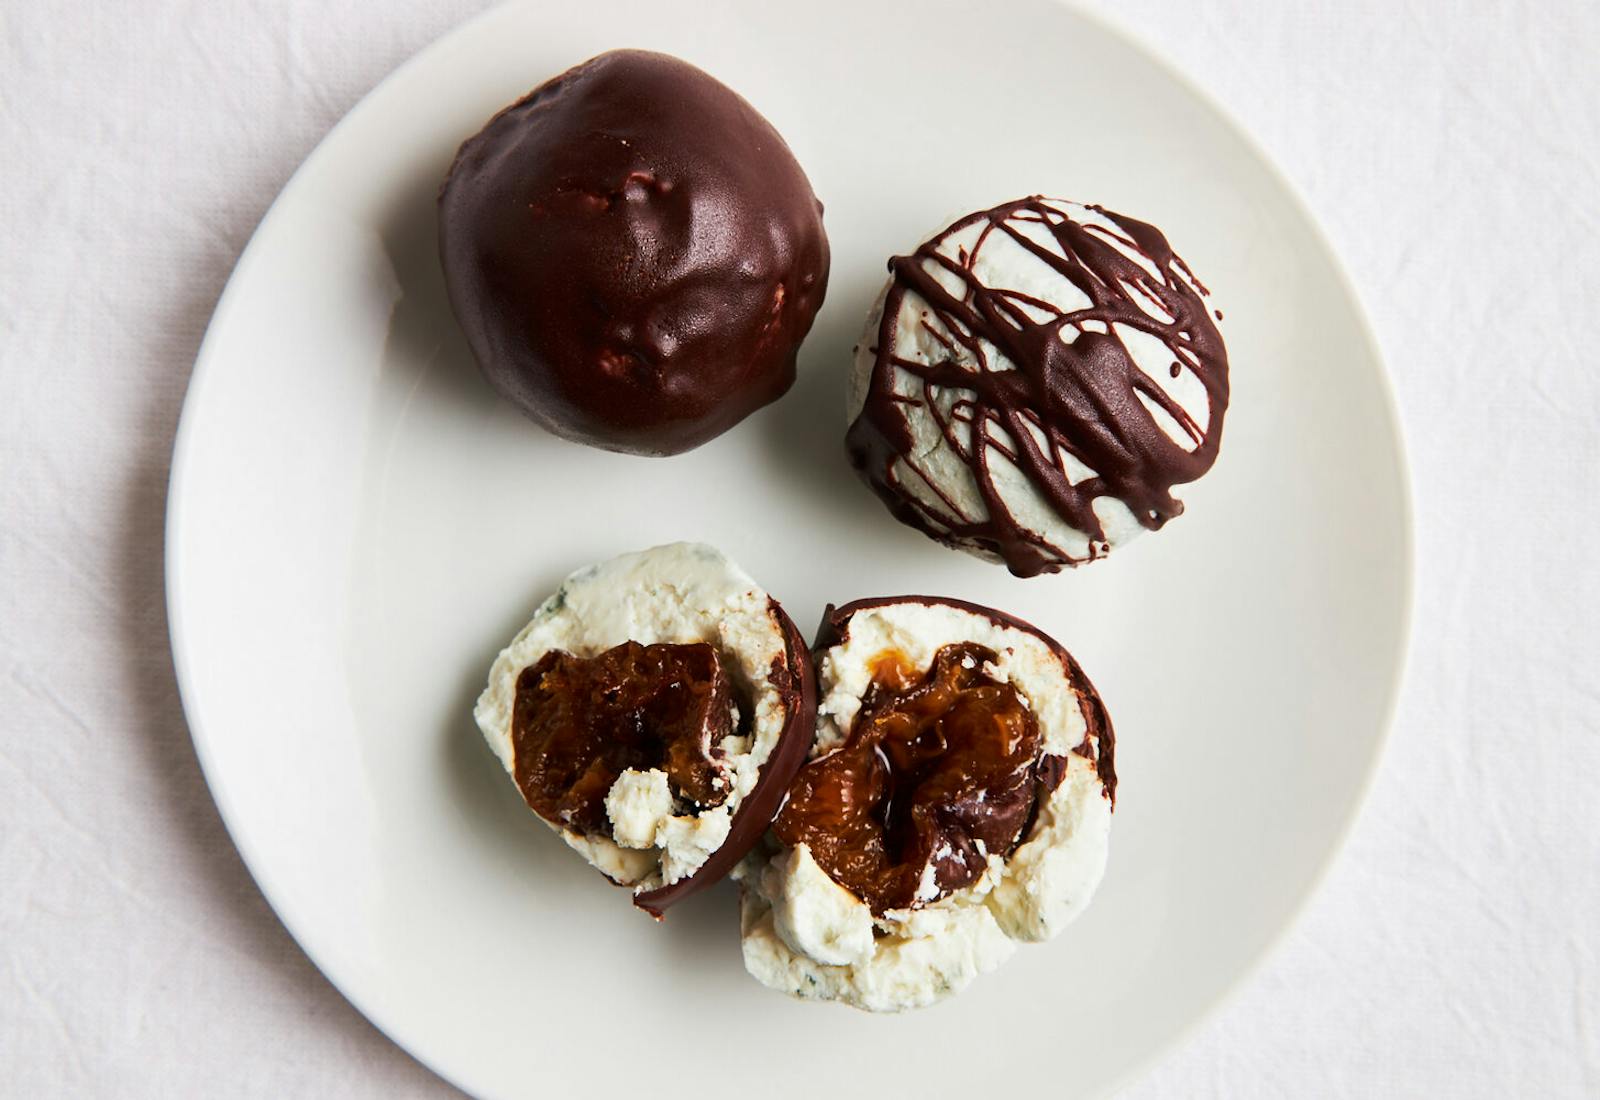 Cheese and chocolate truffles with prunes on white plate atop white surface.